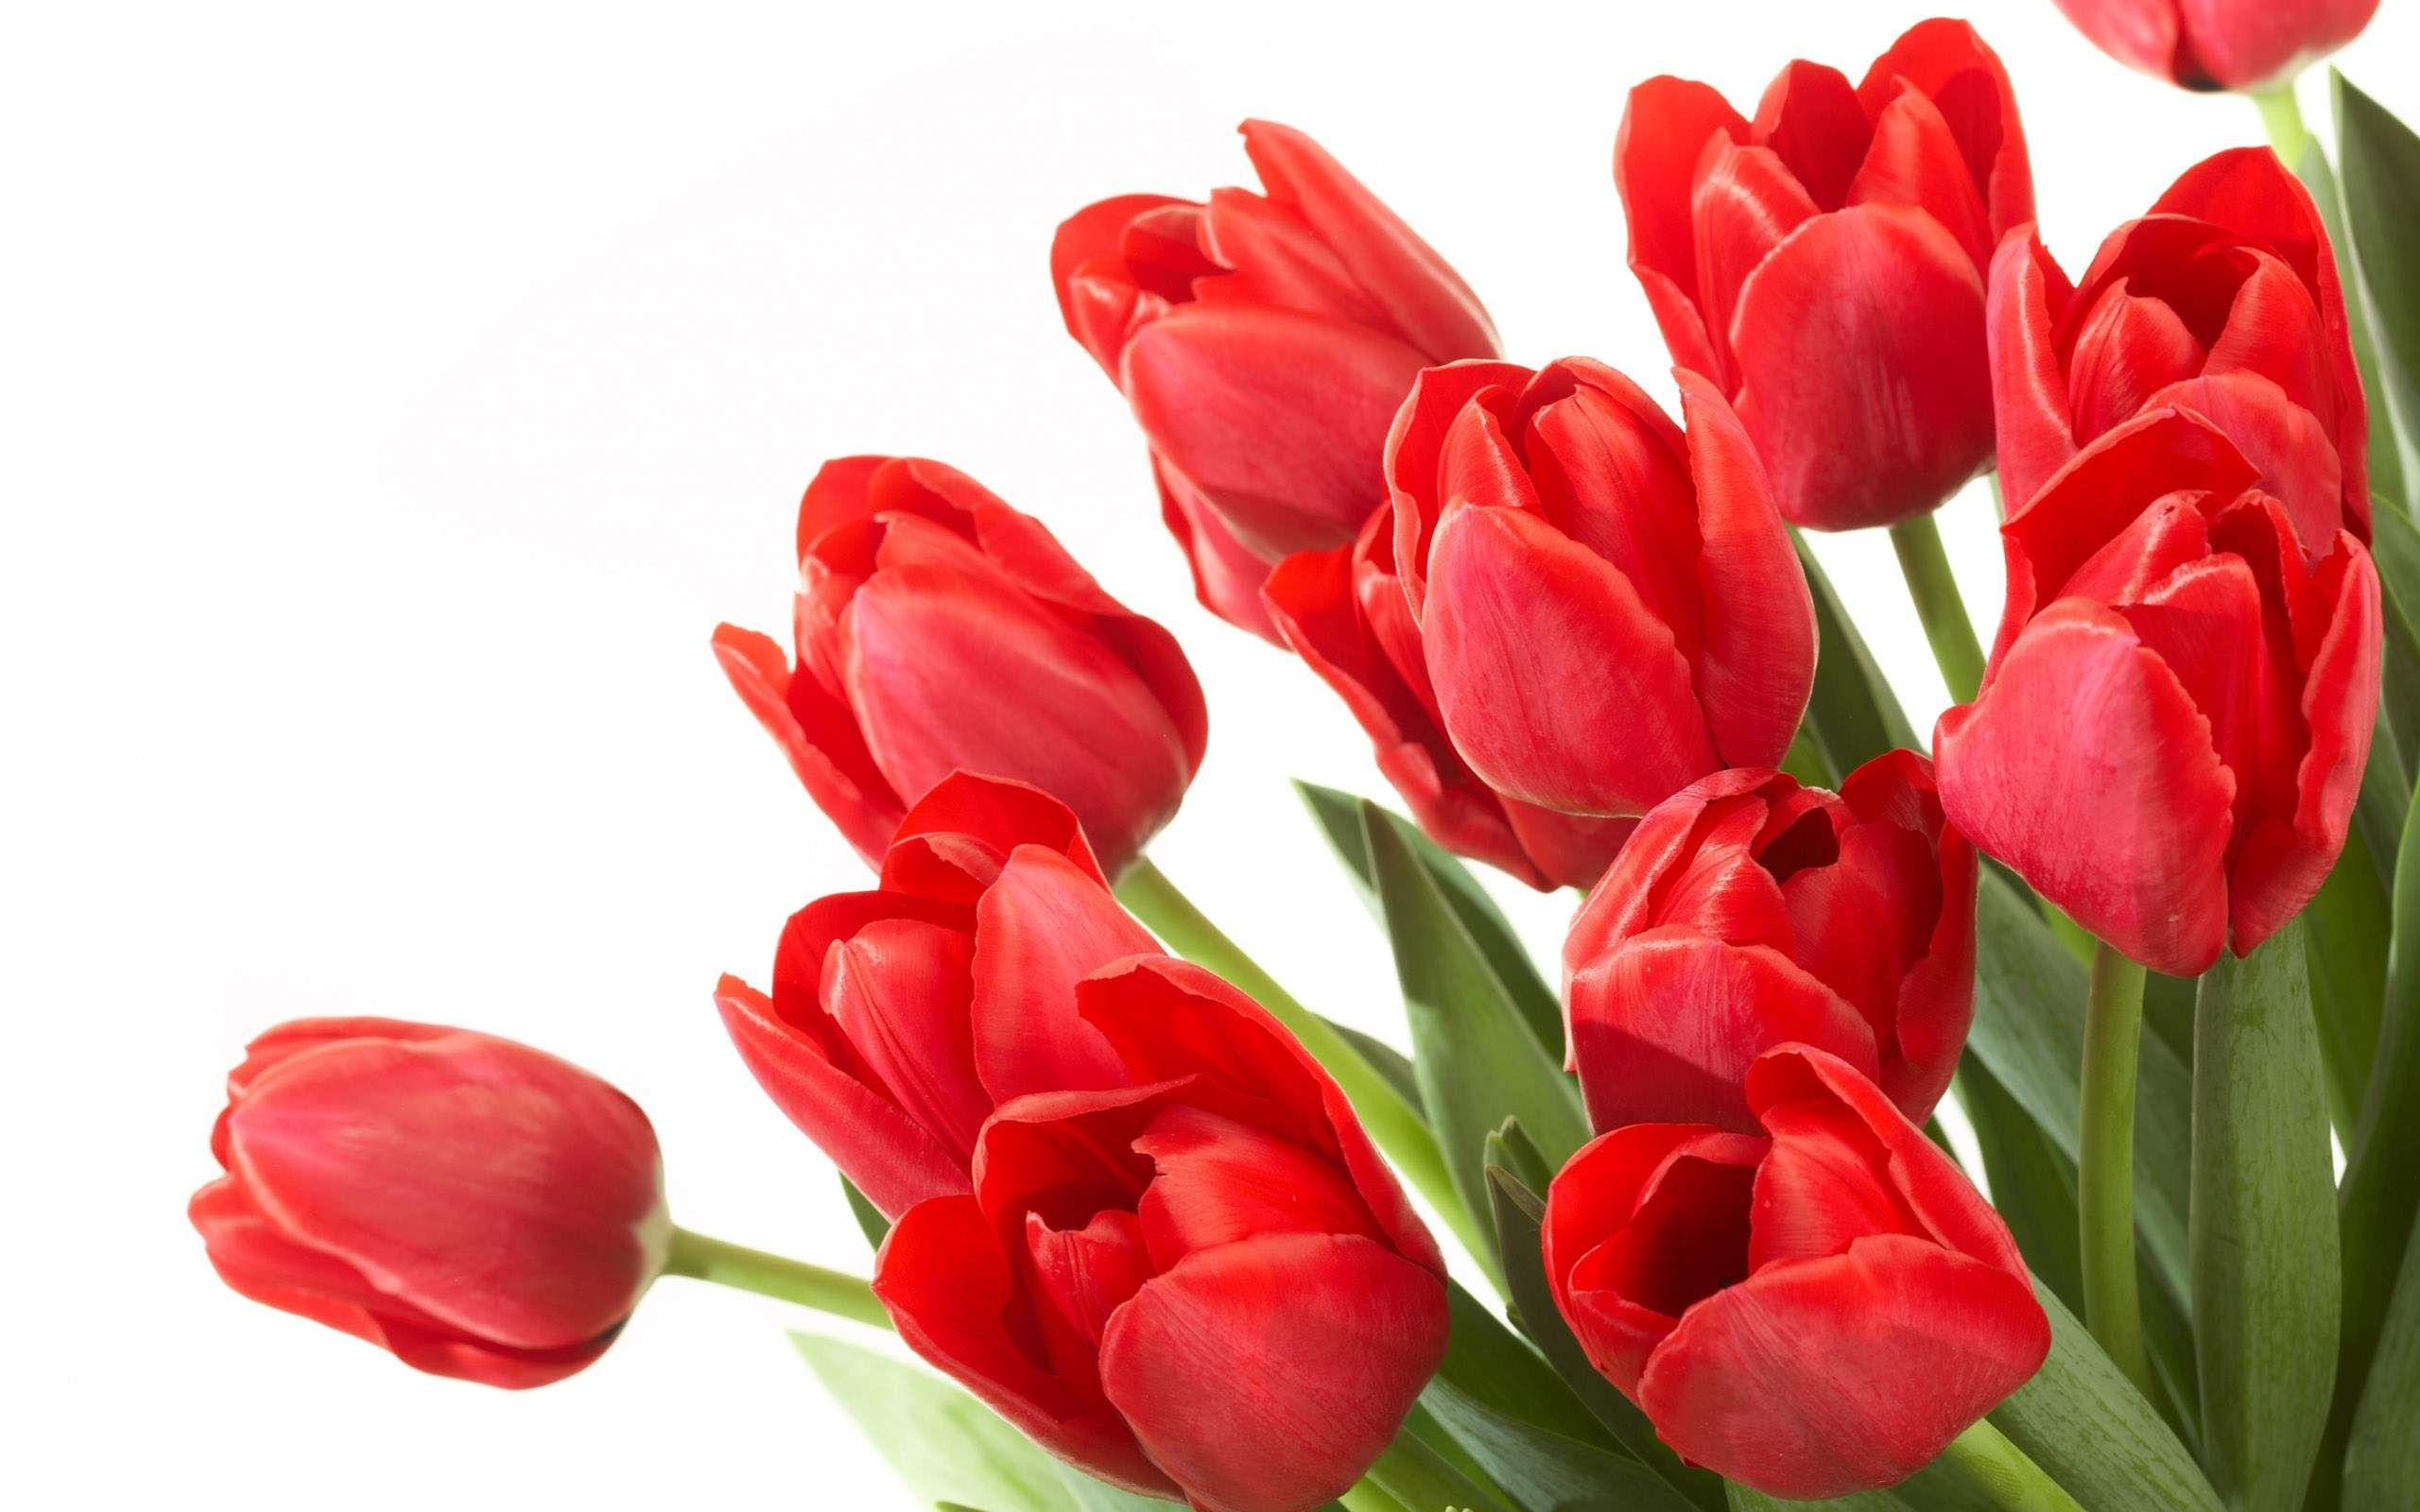 BEAUTIFUL FLOWER WALLPAPERS FREE TO DOWNLOAD.. Style. Beautiful flowers wallpaper, Bulb flowers, Tulips flowers